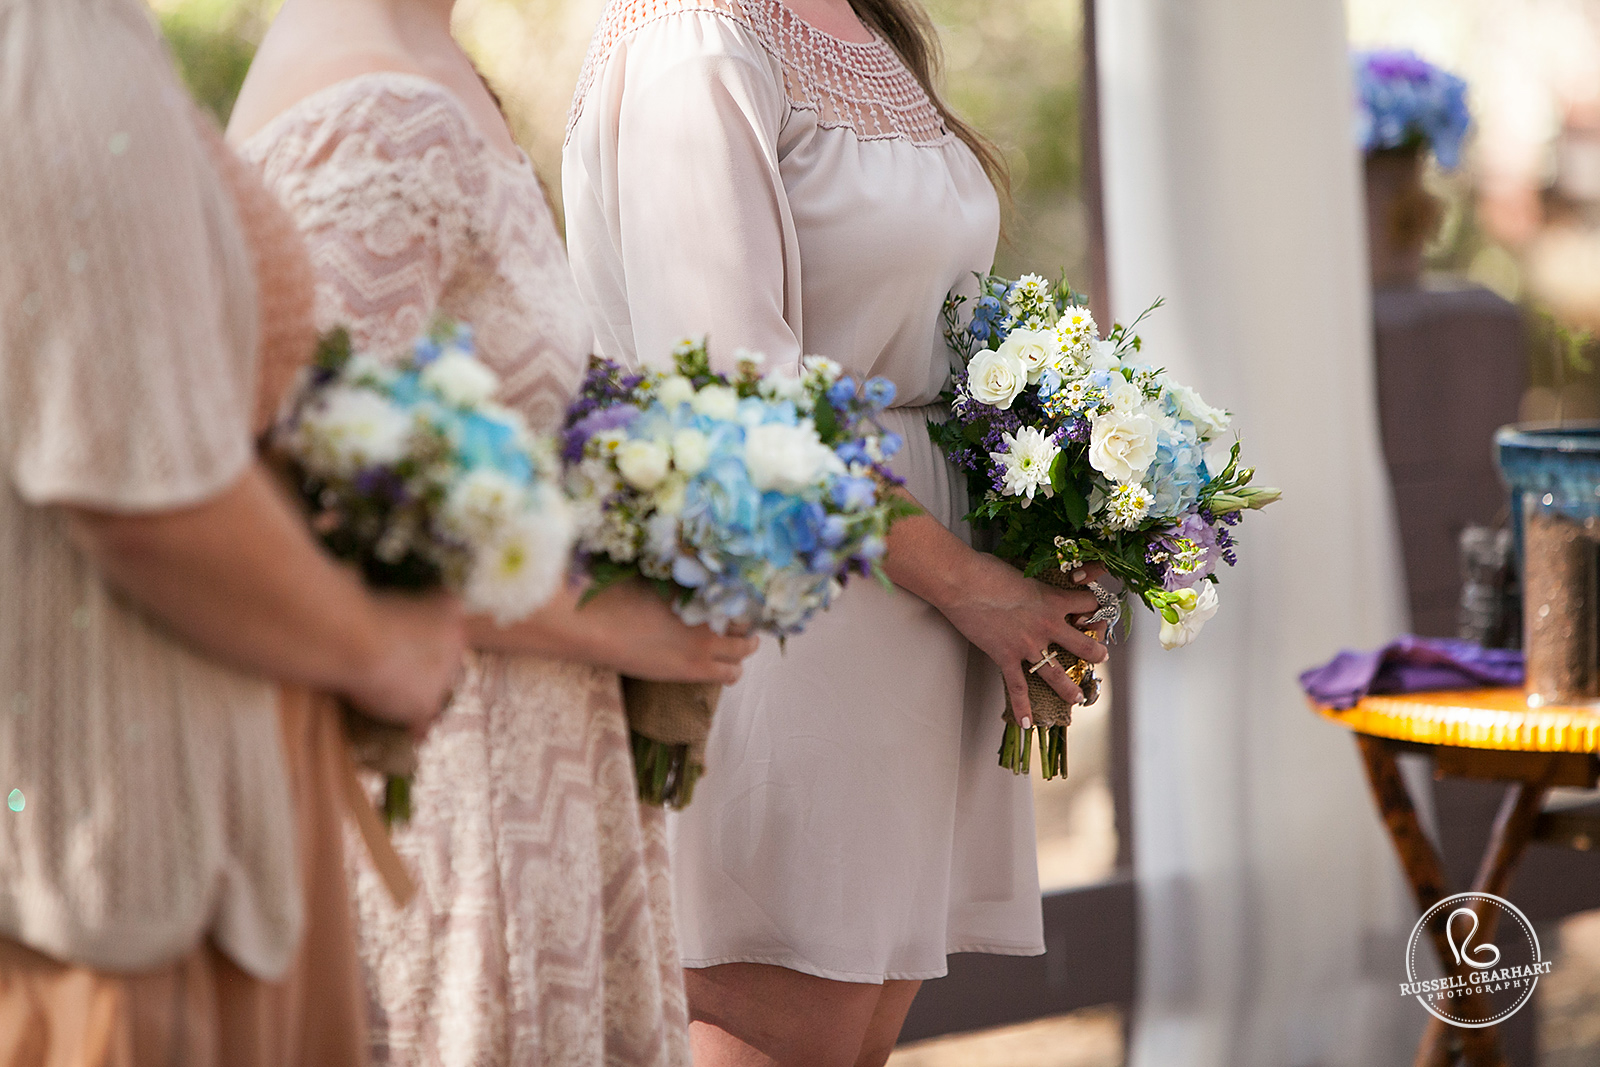 Blue and White Bridesmaid Bouquets – Orange County Park Wedding – Russell Gearhart Photography – www.gearhartphoto.com  